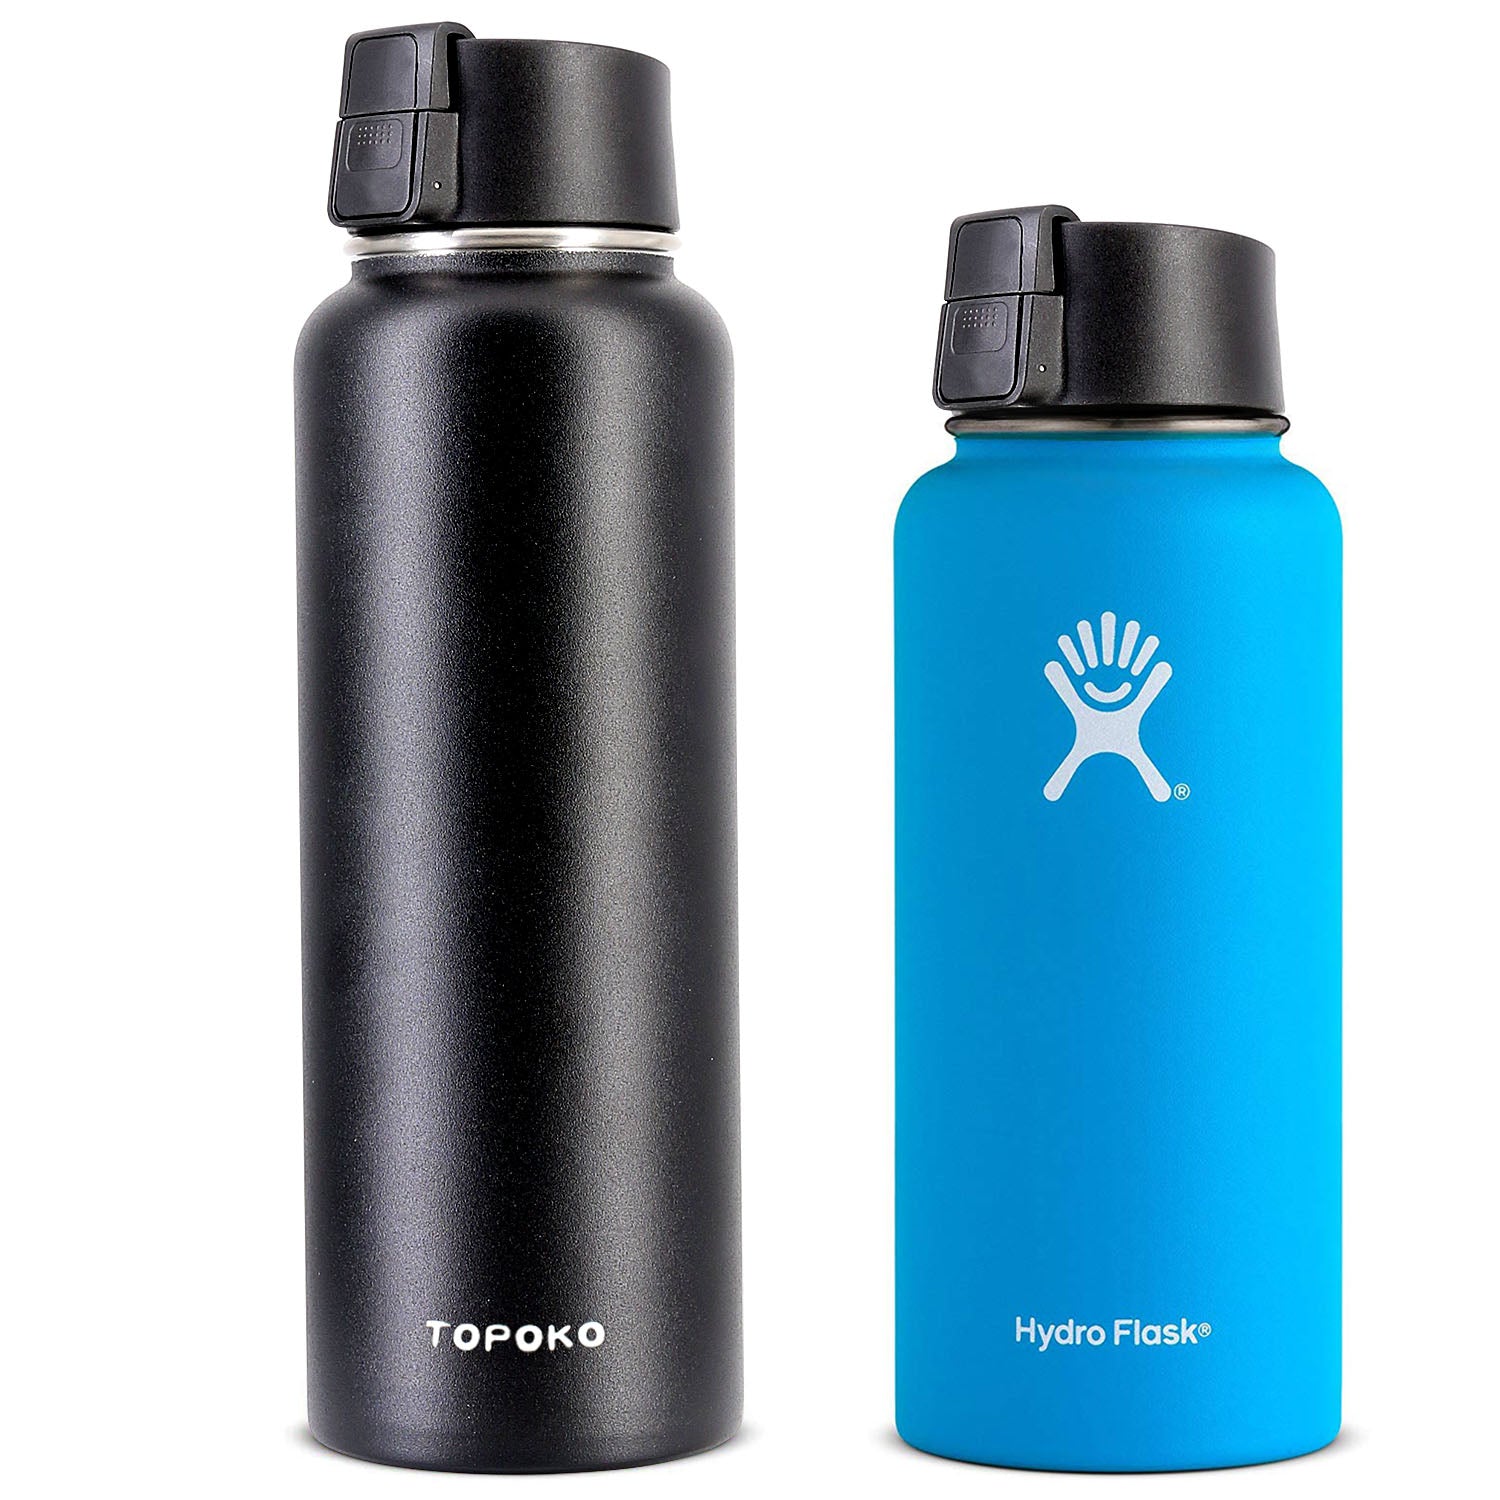 EIPOSAU Auto Flip Lid for Hydro Flask Wide Mouth, Great Spout Lid for Simple Modern, Takeya, Iron Flask and Other Brands, Replacement Lid with Button